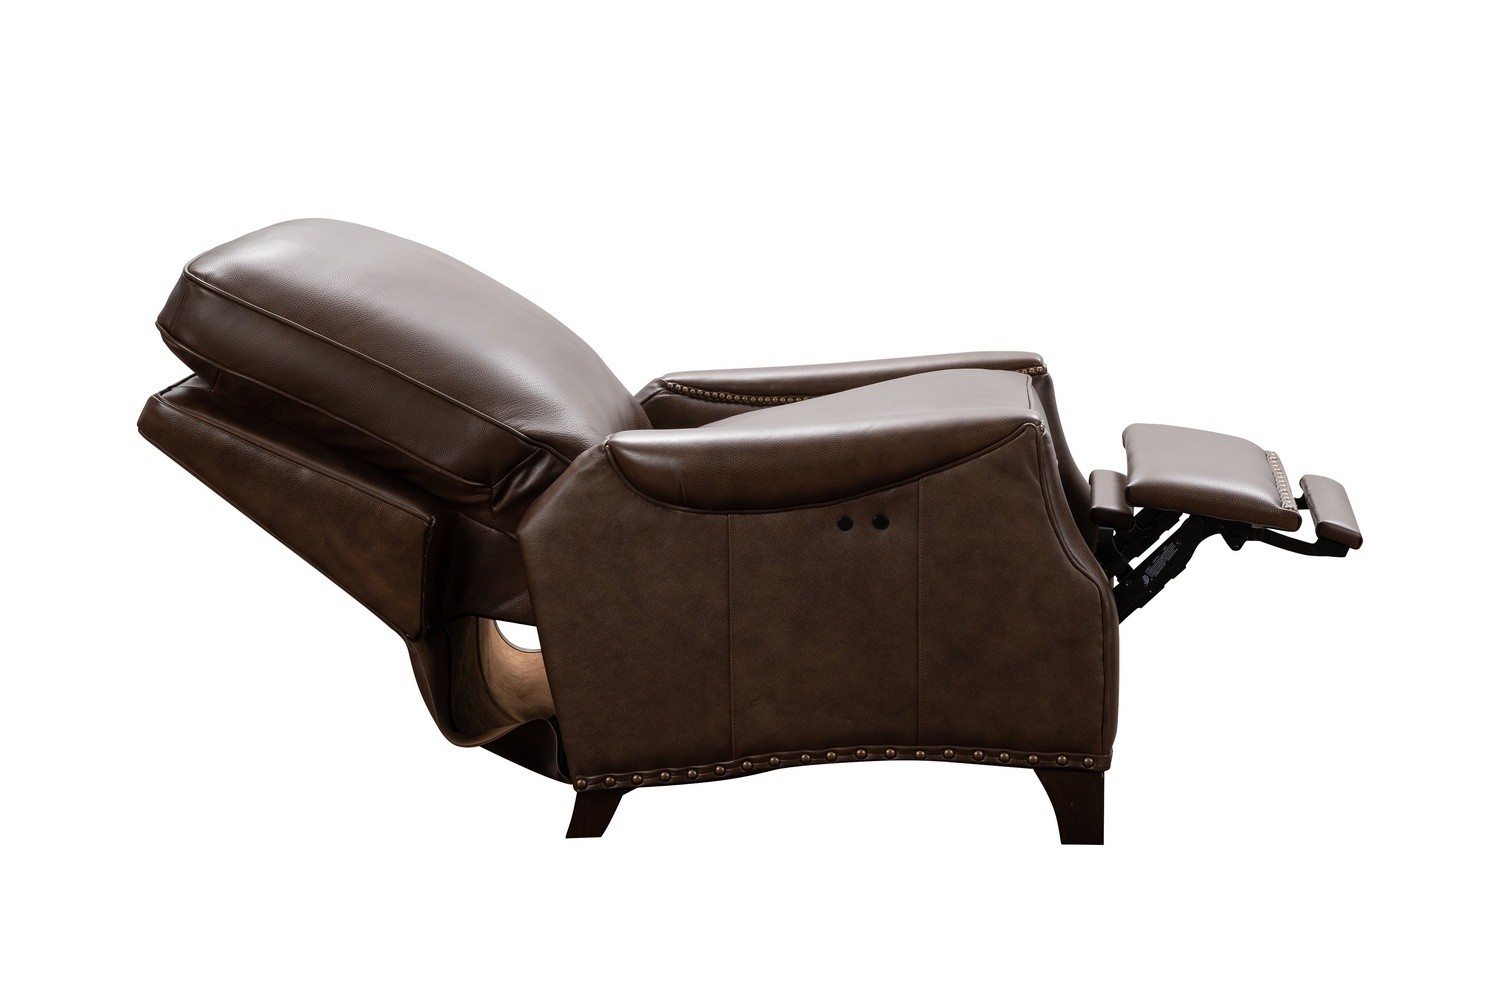 Barcalounger Ellis Power Recliner Chair - Wenlock Double Chocolate/All Leather